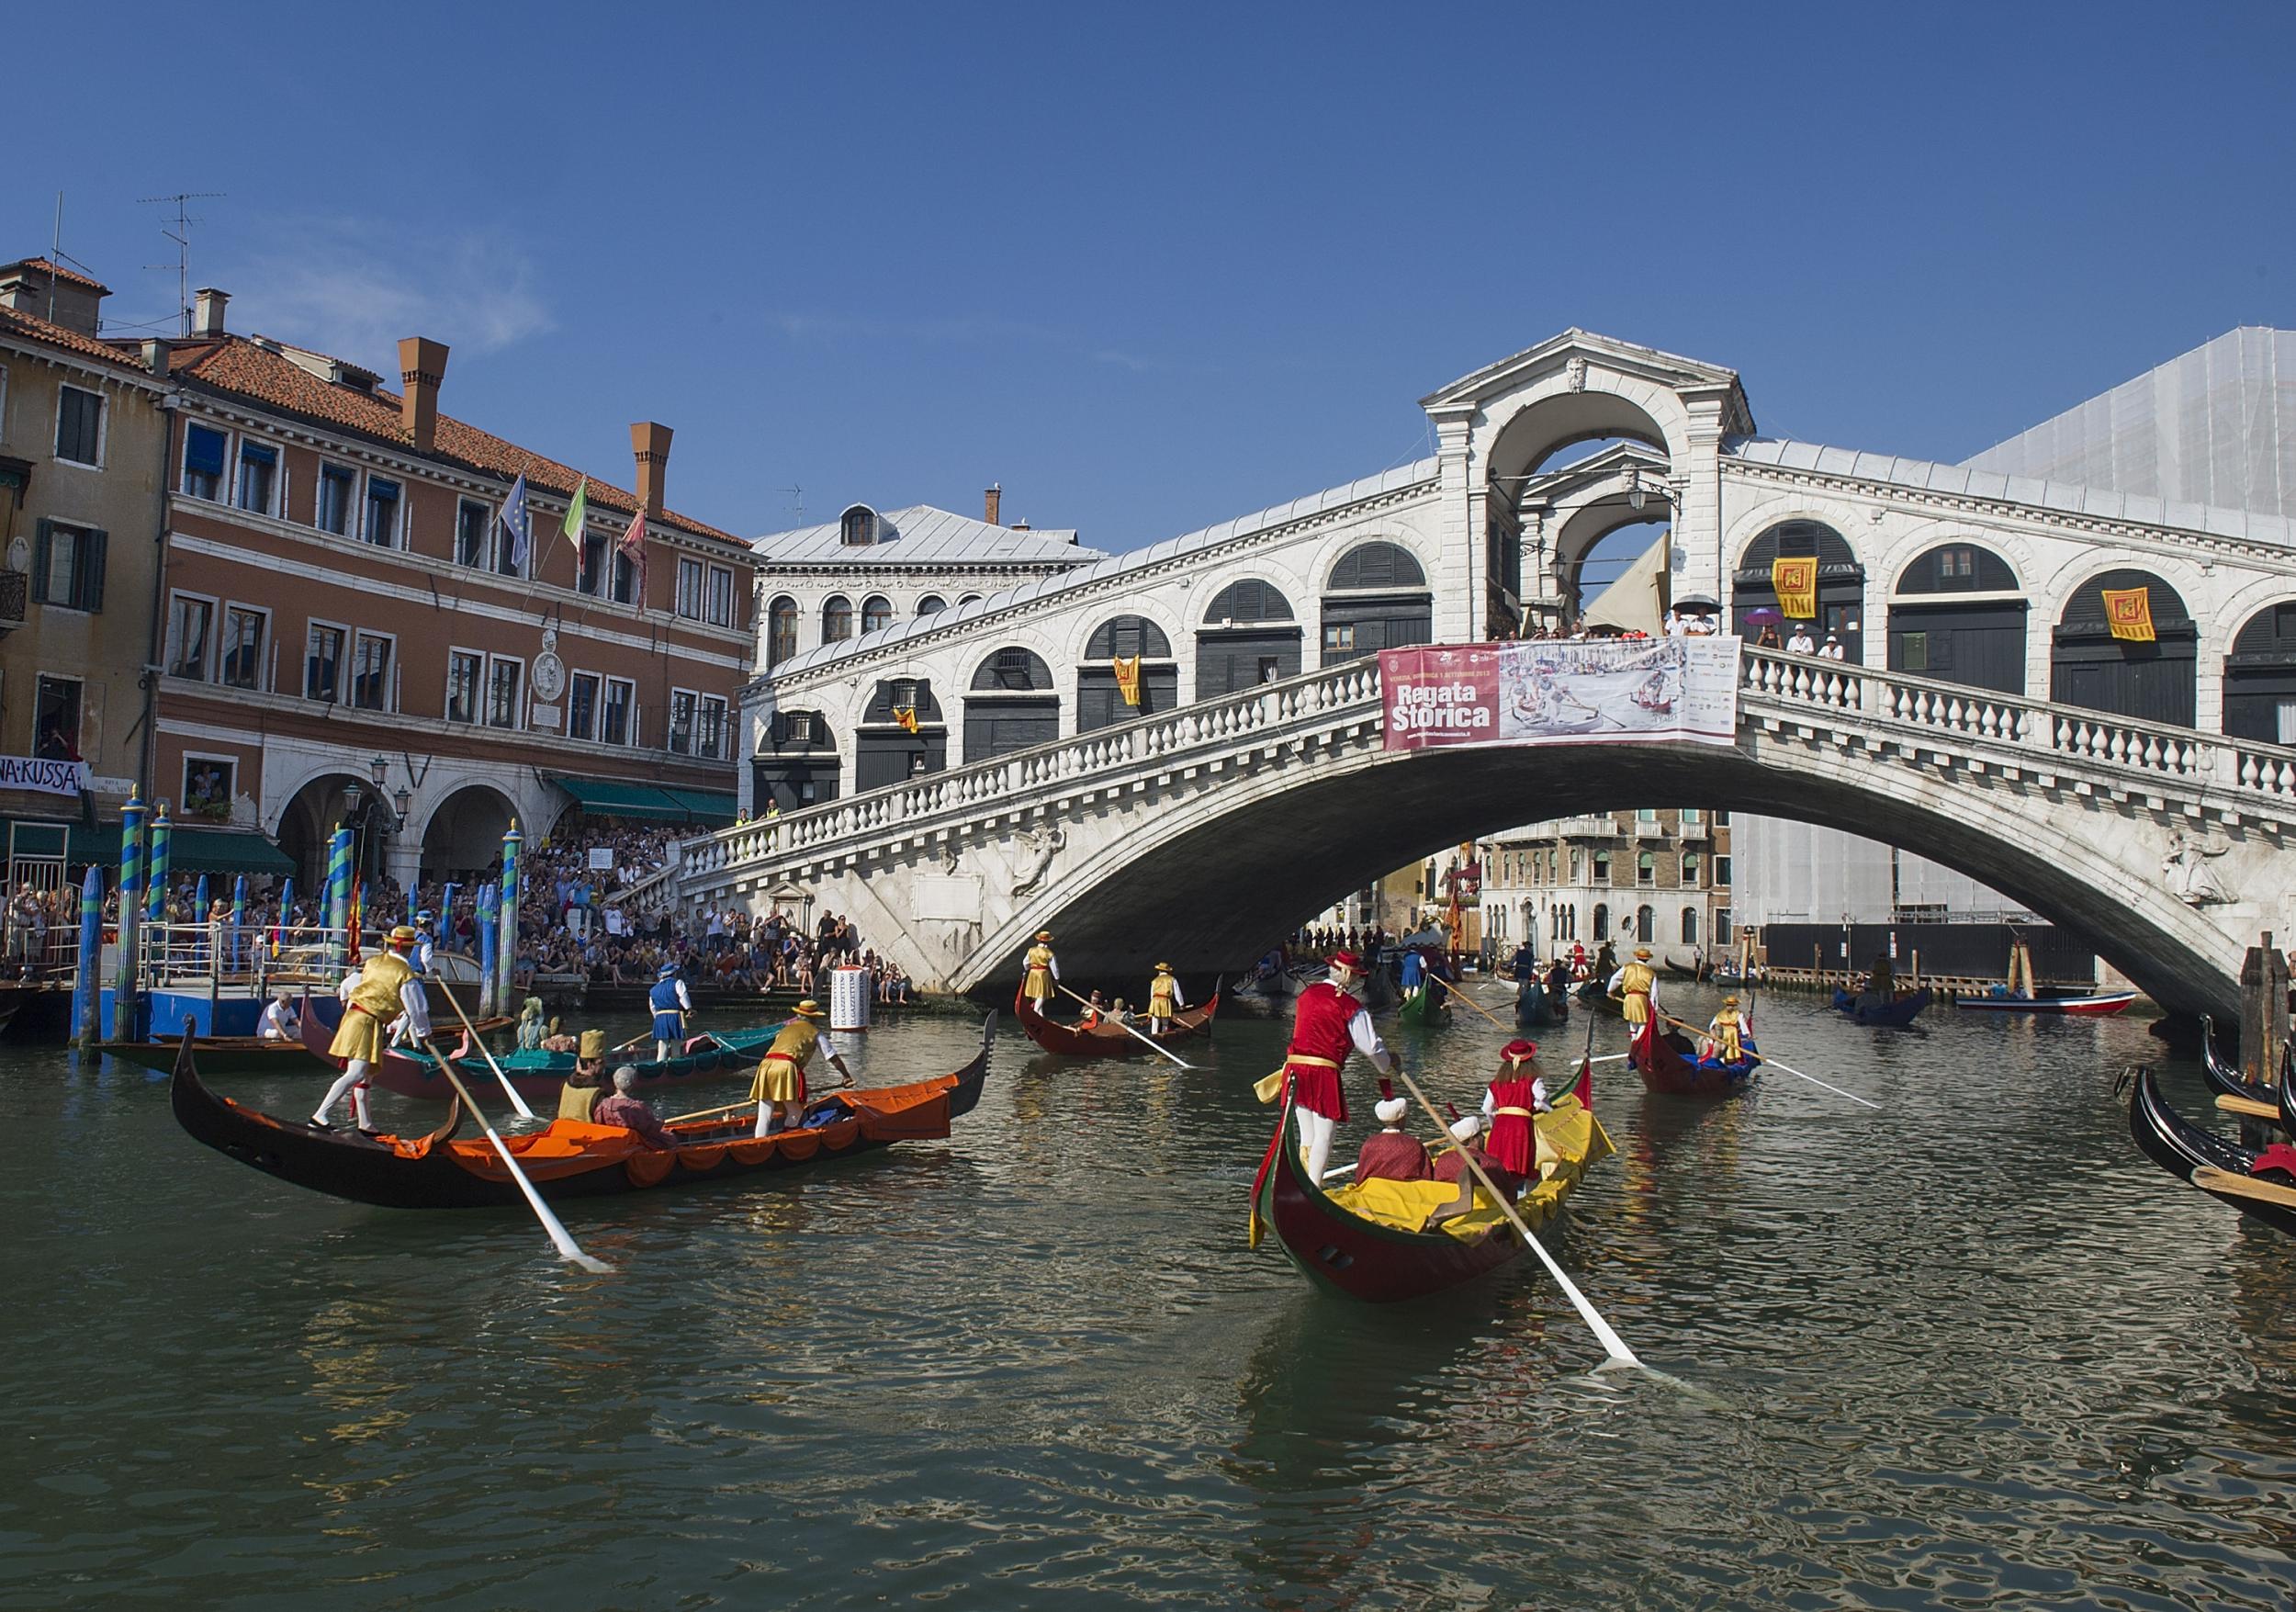 The Rialto Bridge is one of Venice's main tourist sites, as well as the location for events such as the Regatta Storica